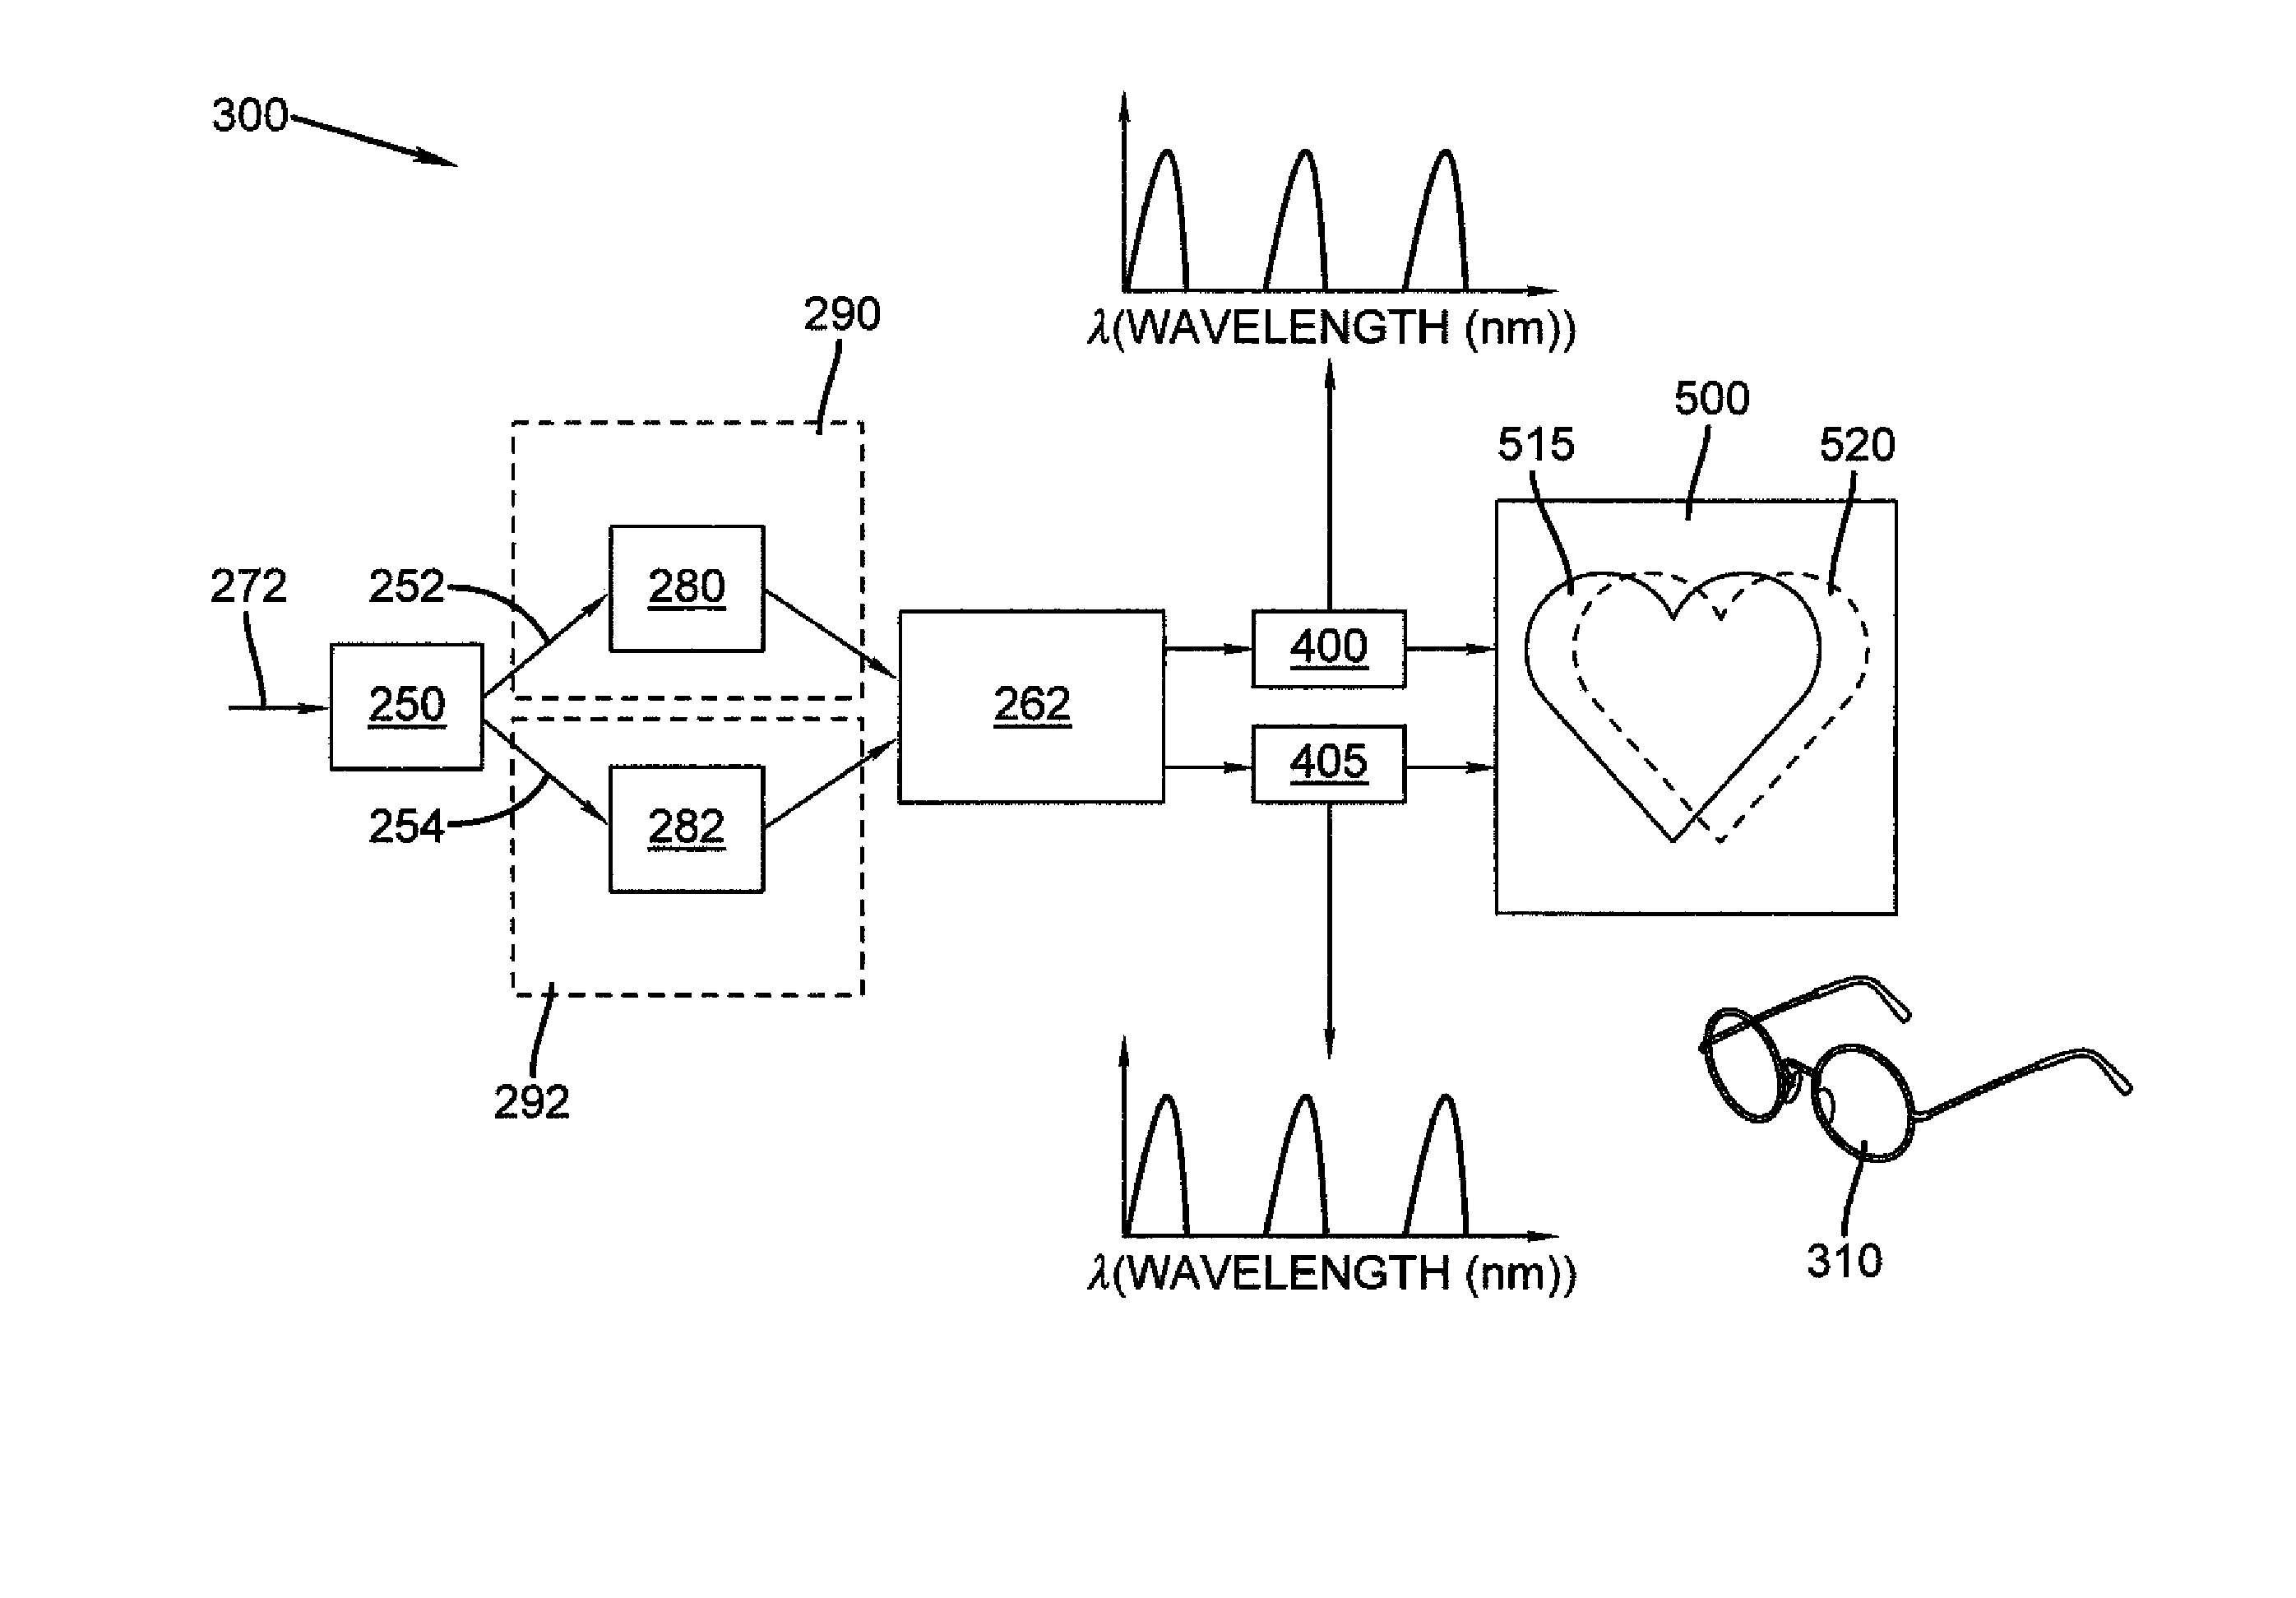 2d/3d switchable color display apparatus